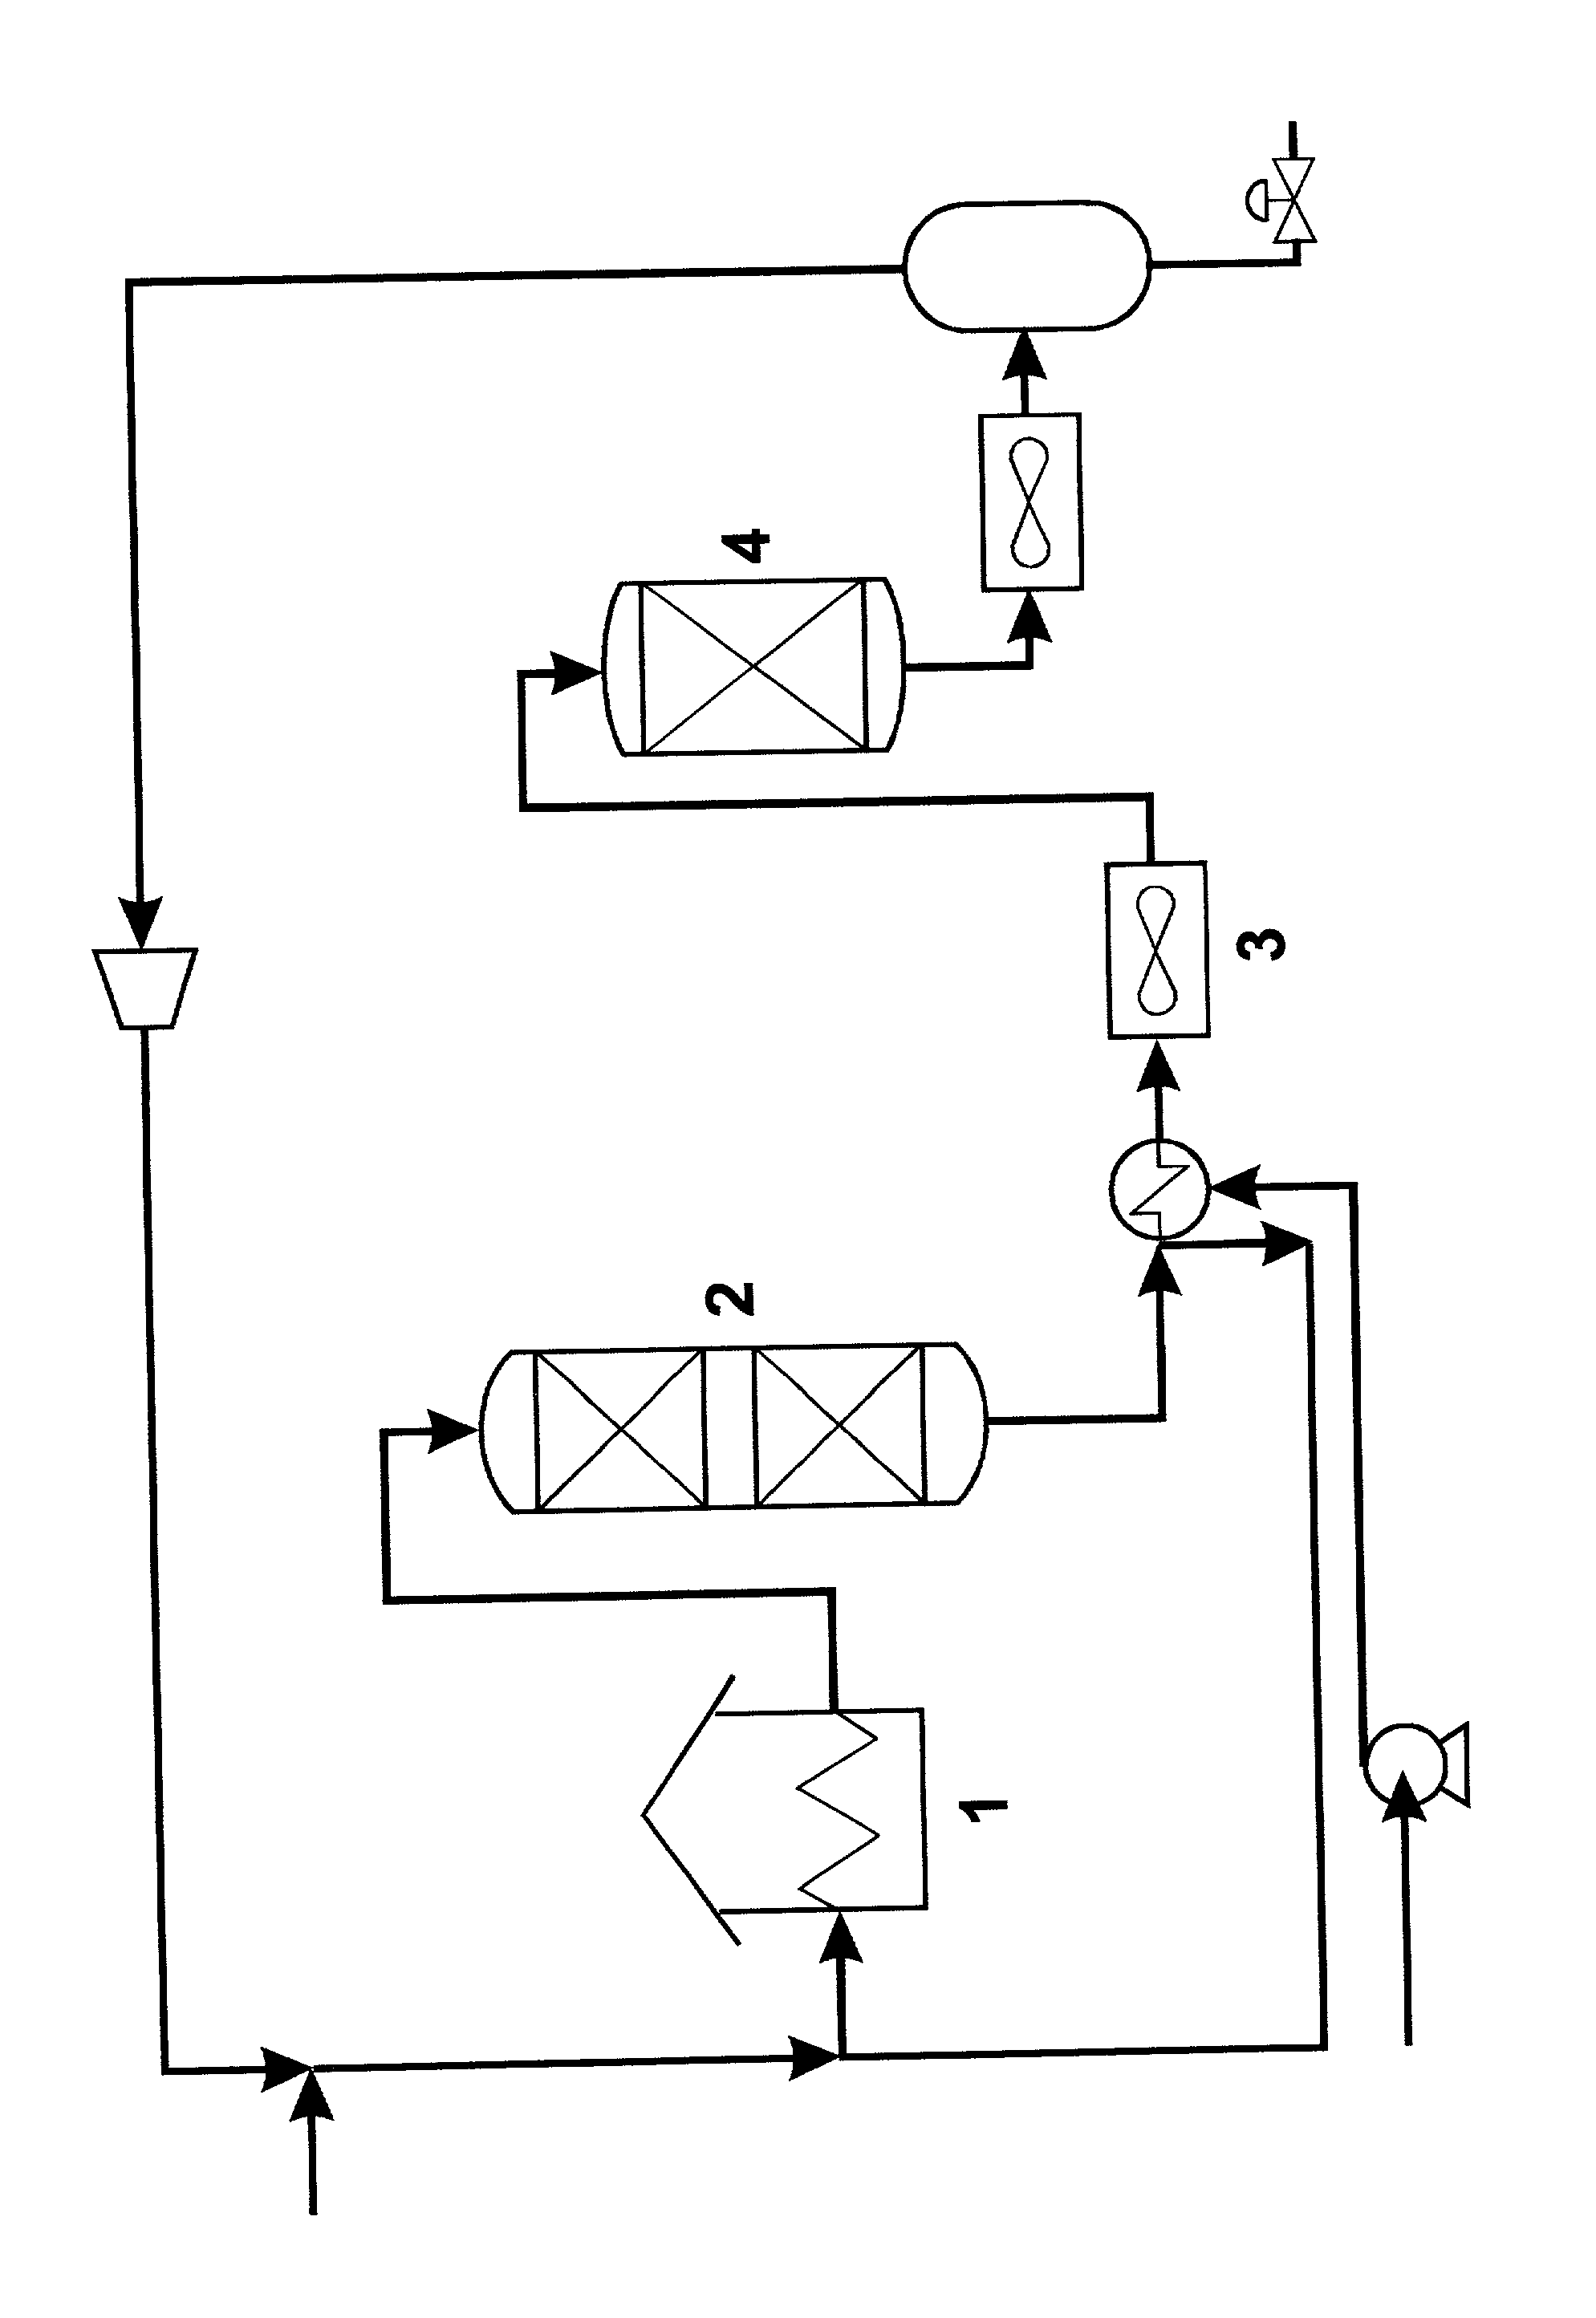 Process for reducing content of sulphur compounds and poly-aromatic hydrocarbons in a hydrocarbon feed